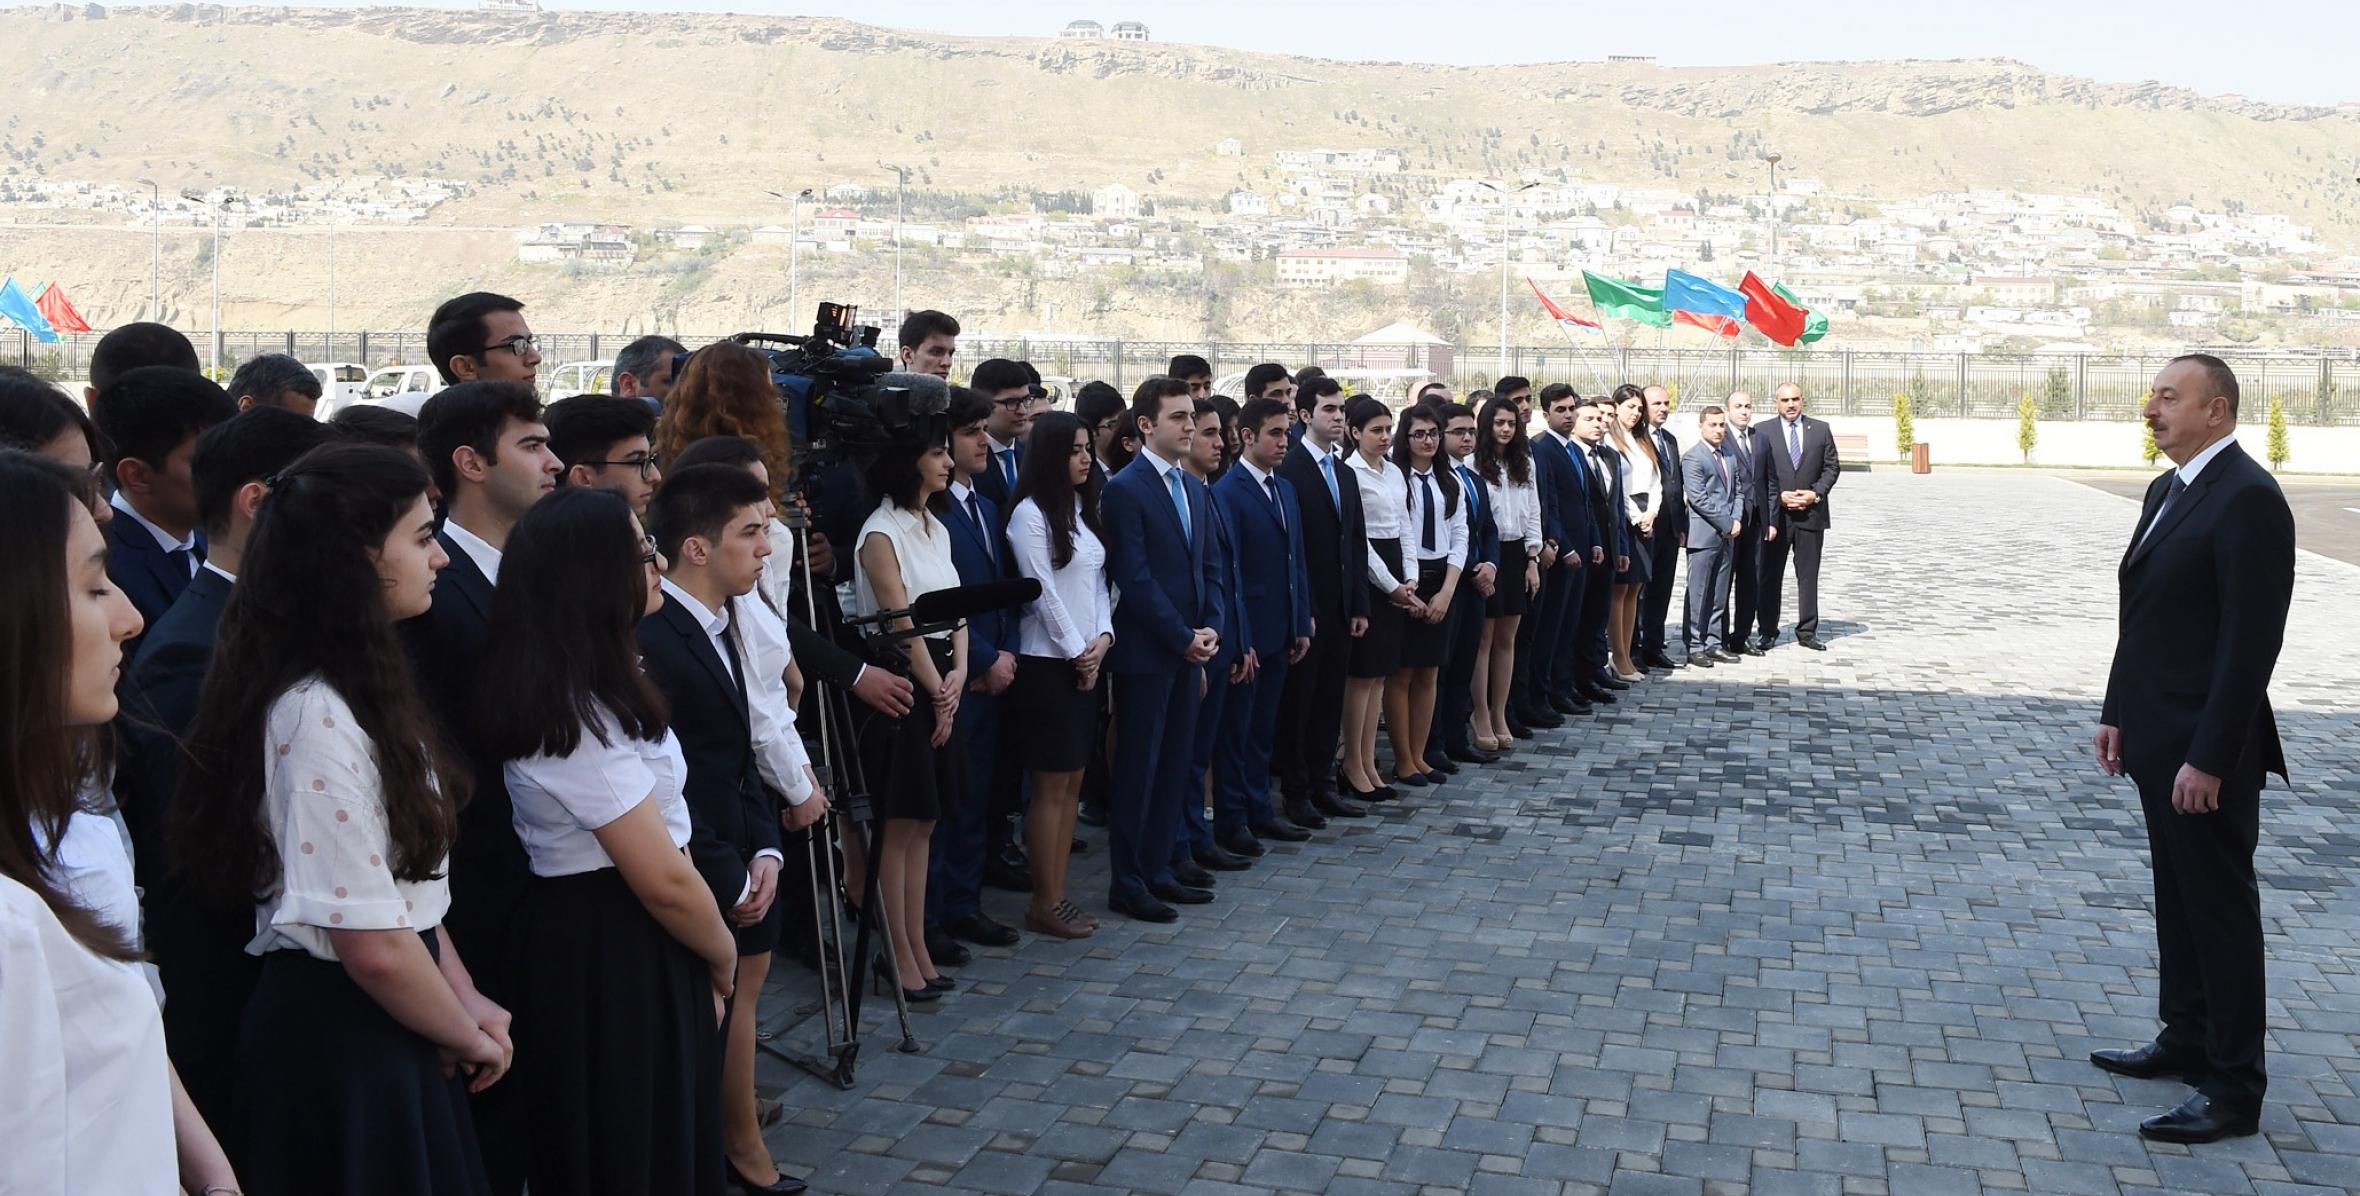 Speech by Ilham Aliyev at the opening of a campus of SOCAR's Baku Higher Oil School